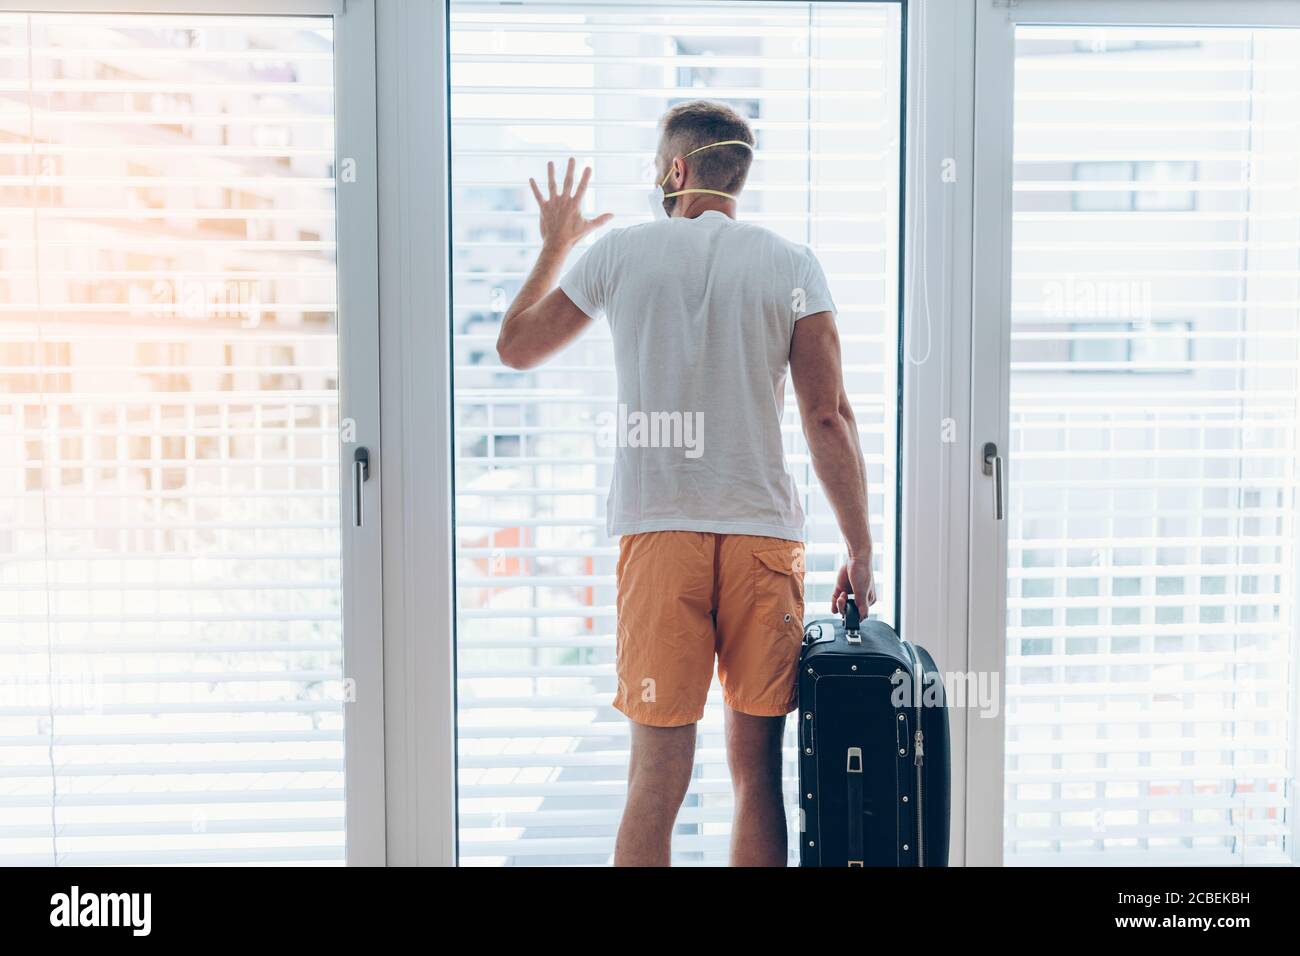 Difficult holiday travel during the corona virus pandemic Stock Photo